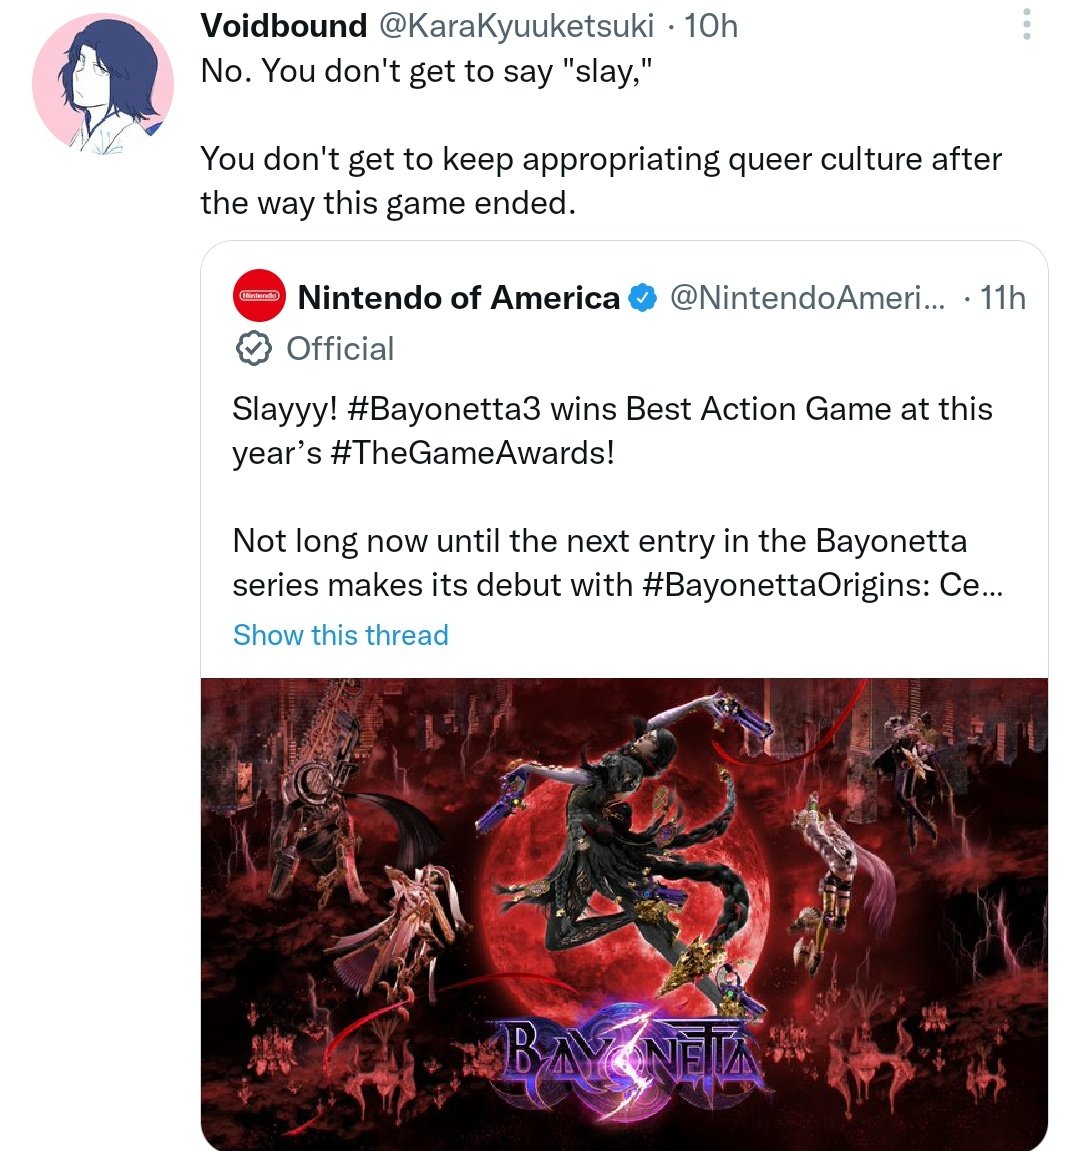 When did Bayonetta become a part of queer culture?